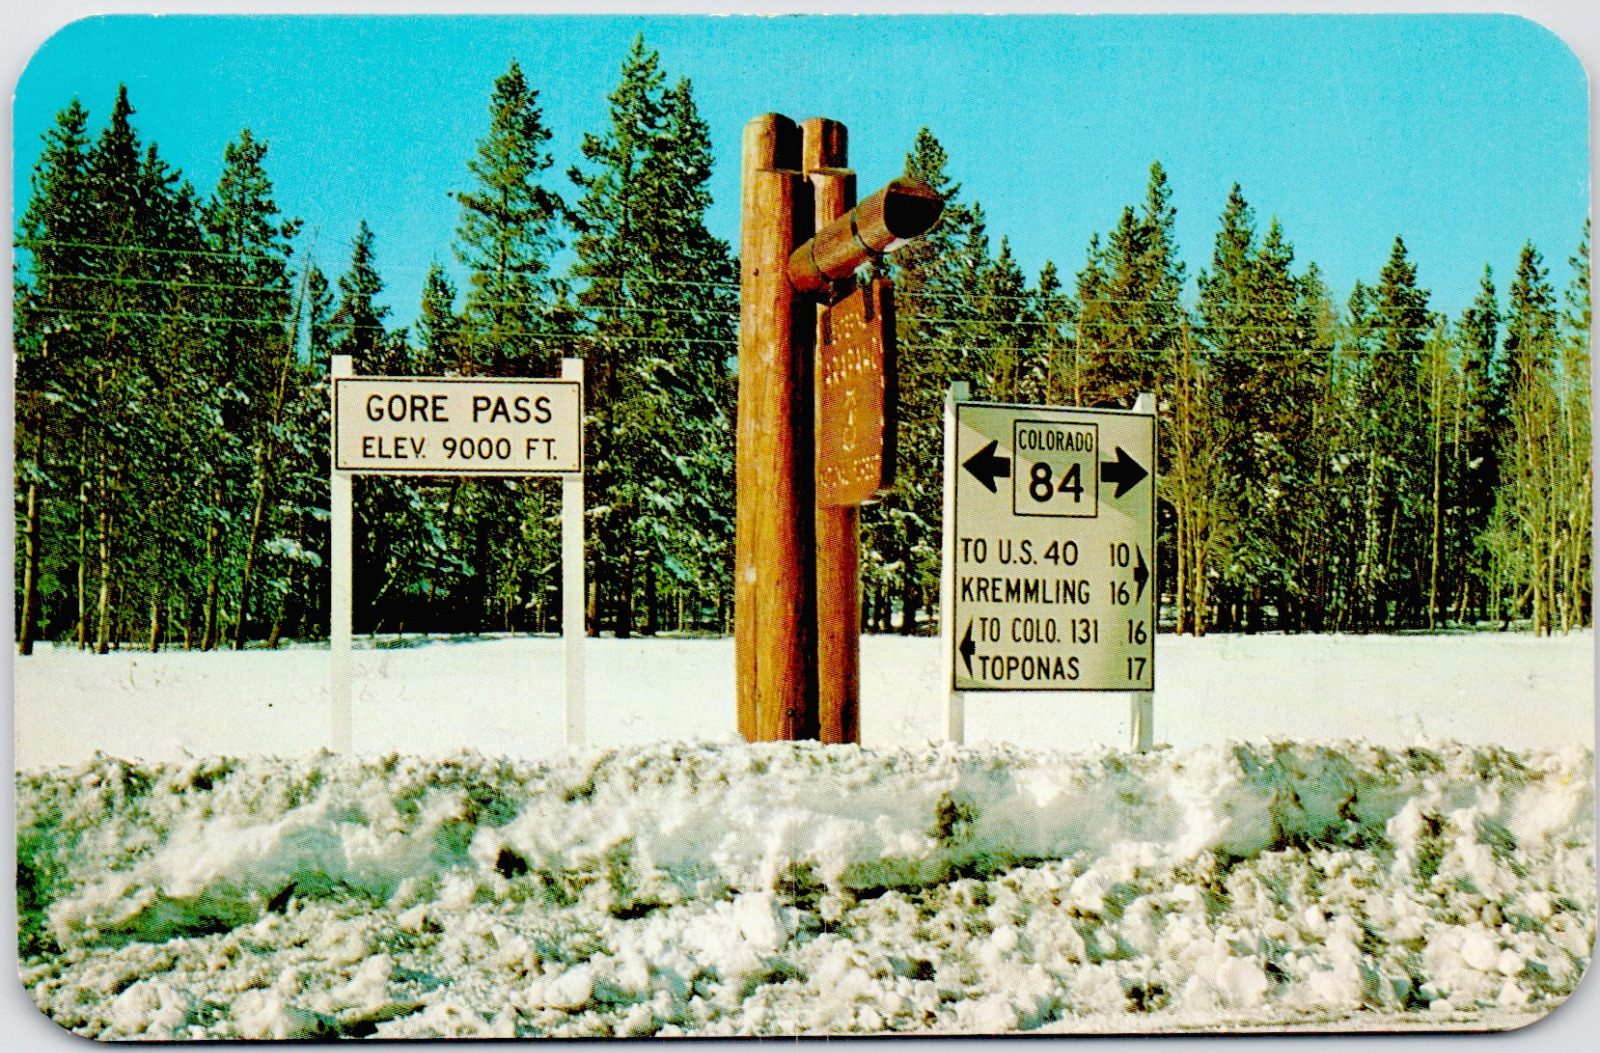 Gore Pass Marker Highway 84 To Steamboat Springs Colorado CO Vintage Postcard